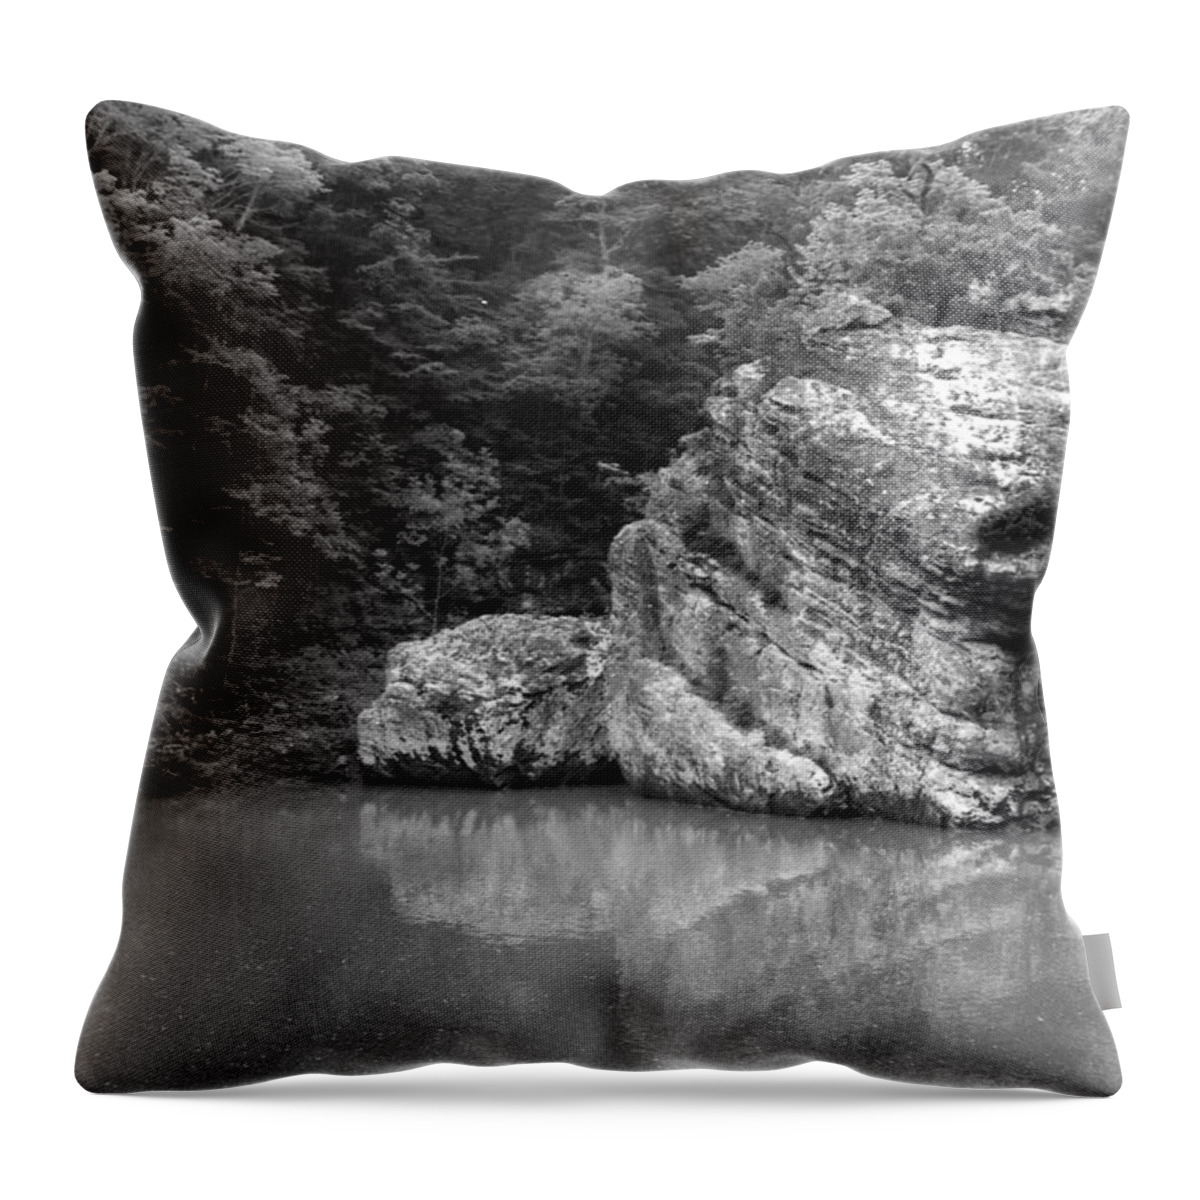 Rock Throw Pillow featuring the photograph Rock by Curtis J Neeley Jr